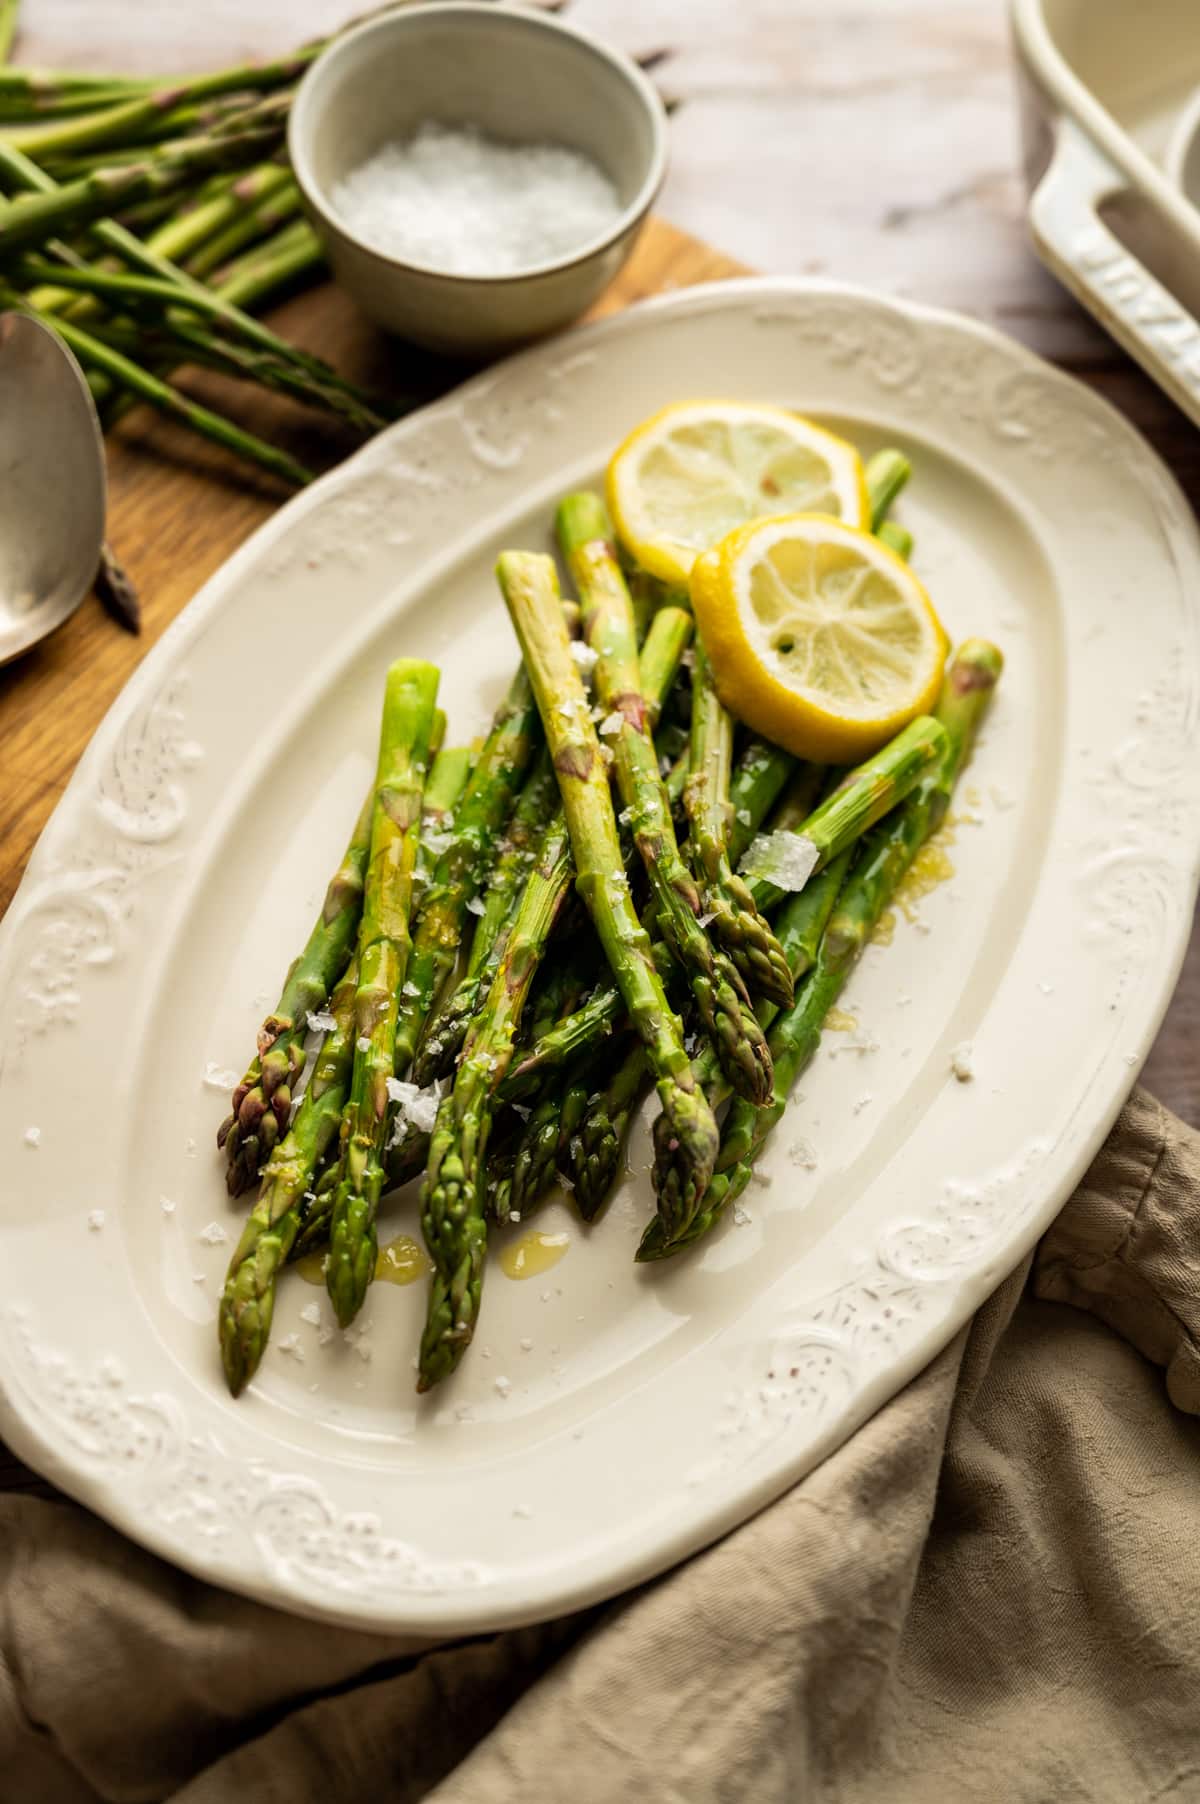 Freshly microwaved asparagus with two lemon slices on top and a tan cloth napkin to the side.